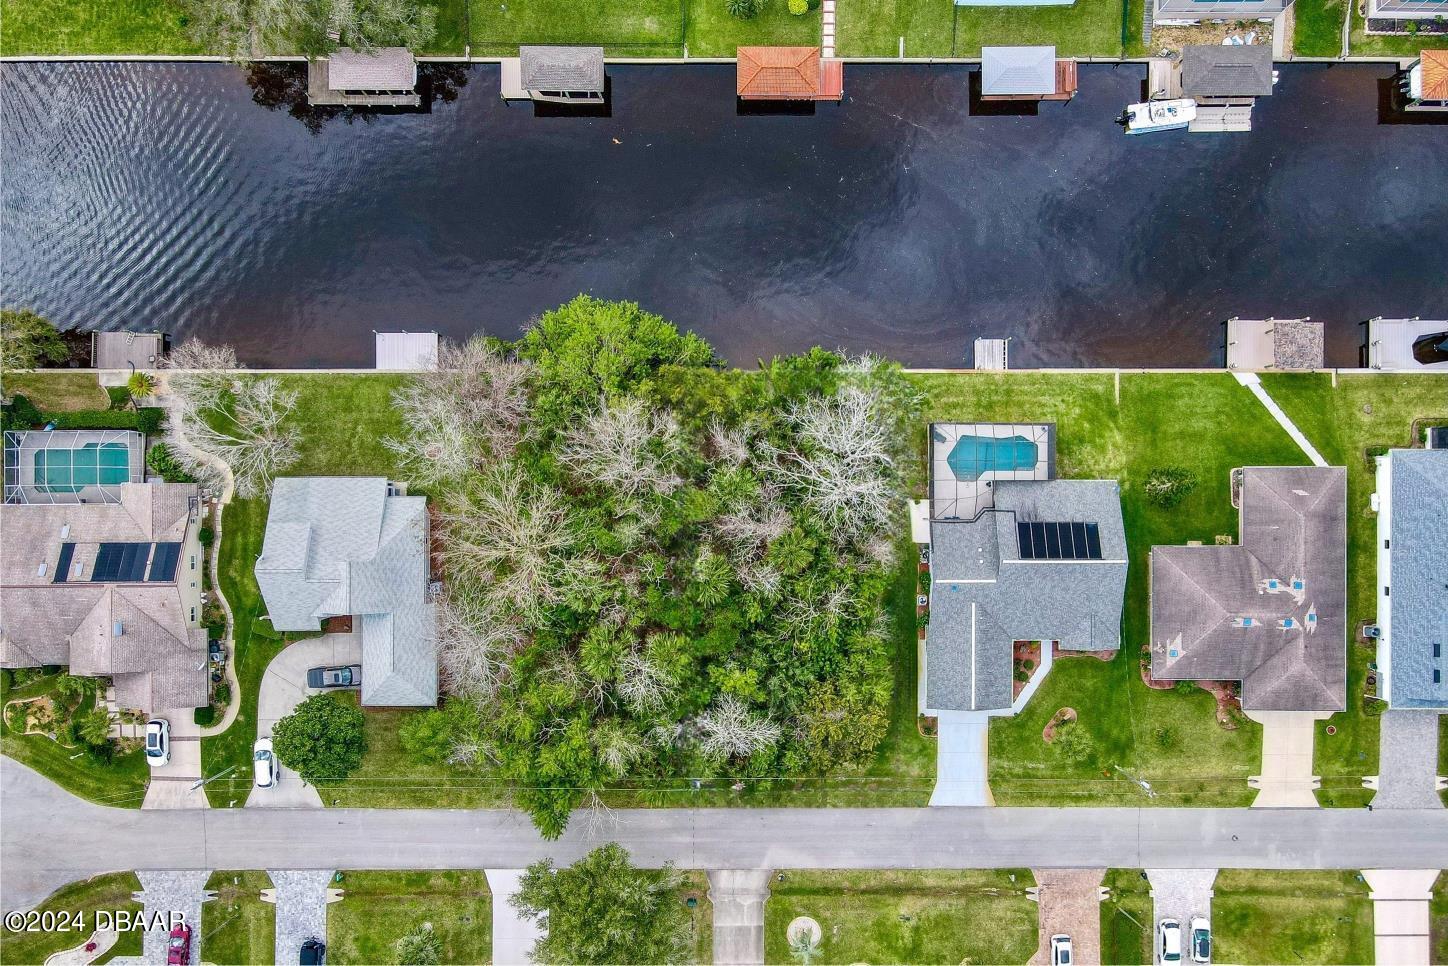 an aerial view of a house with a garden and yard